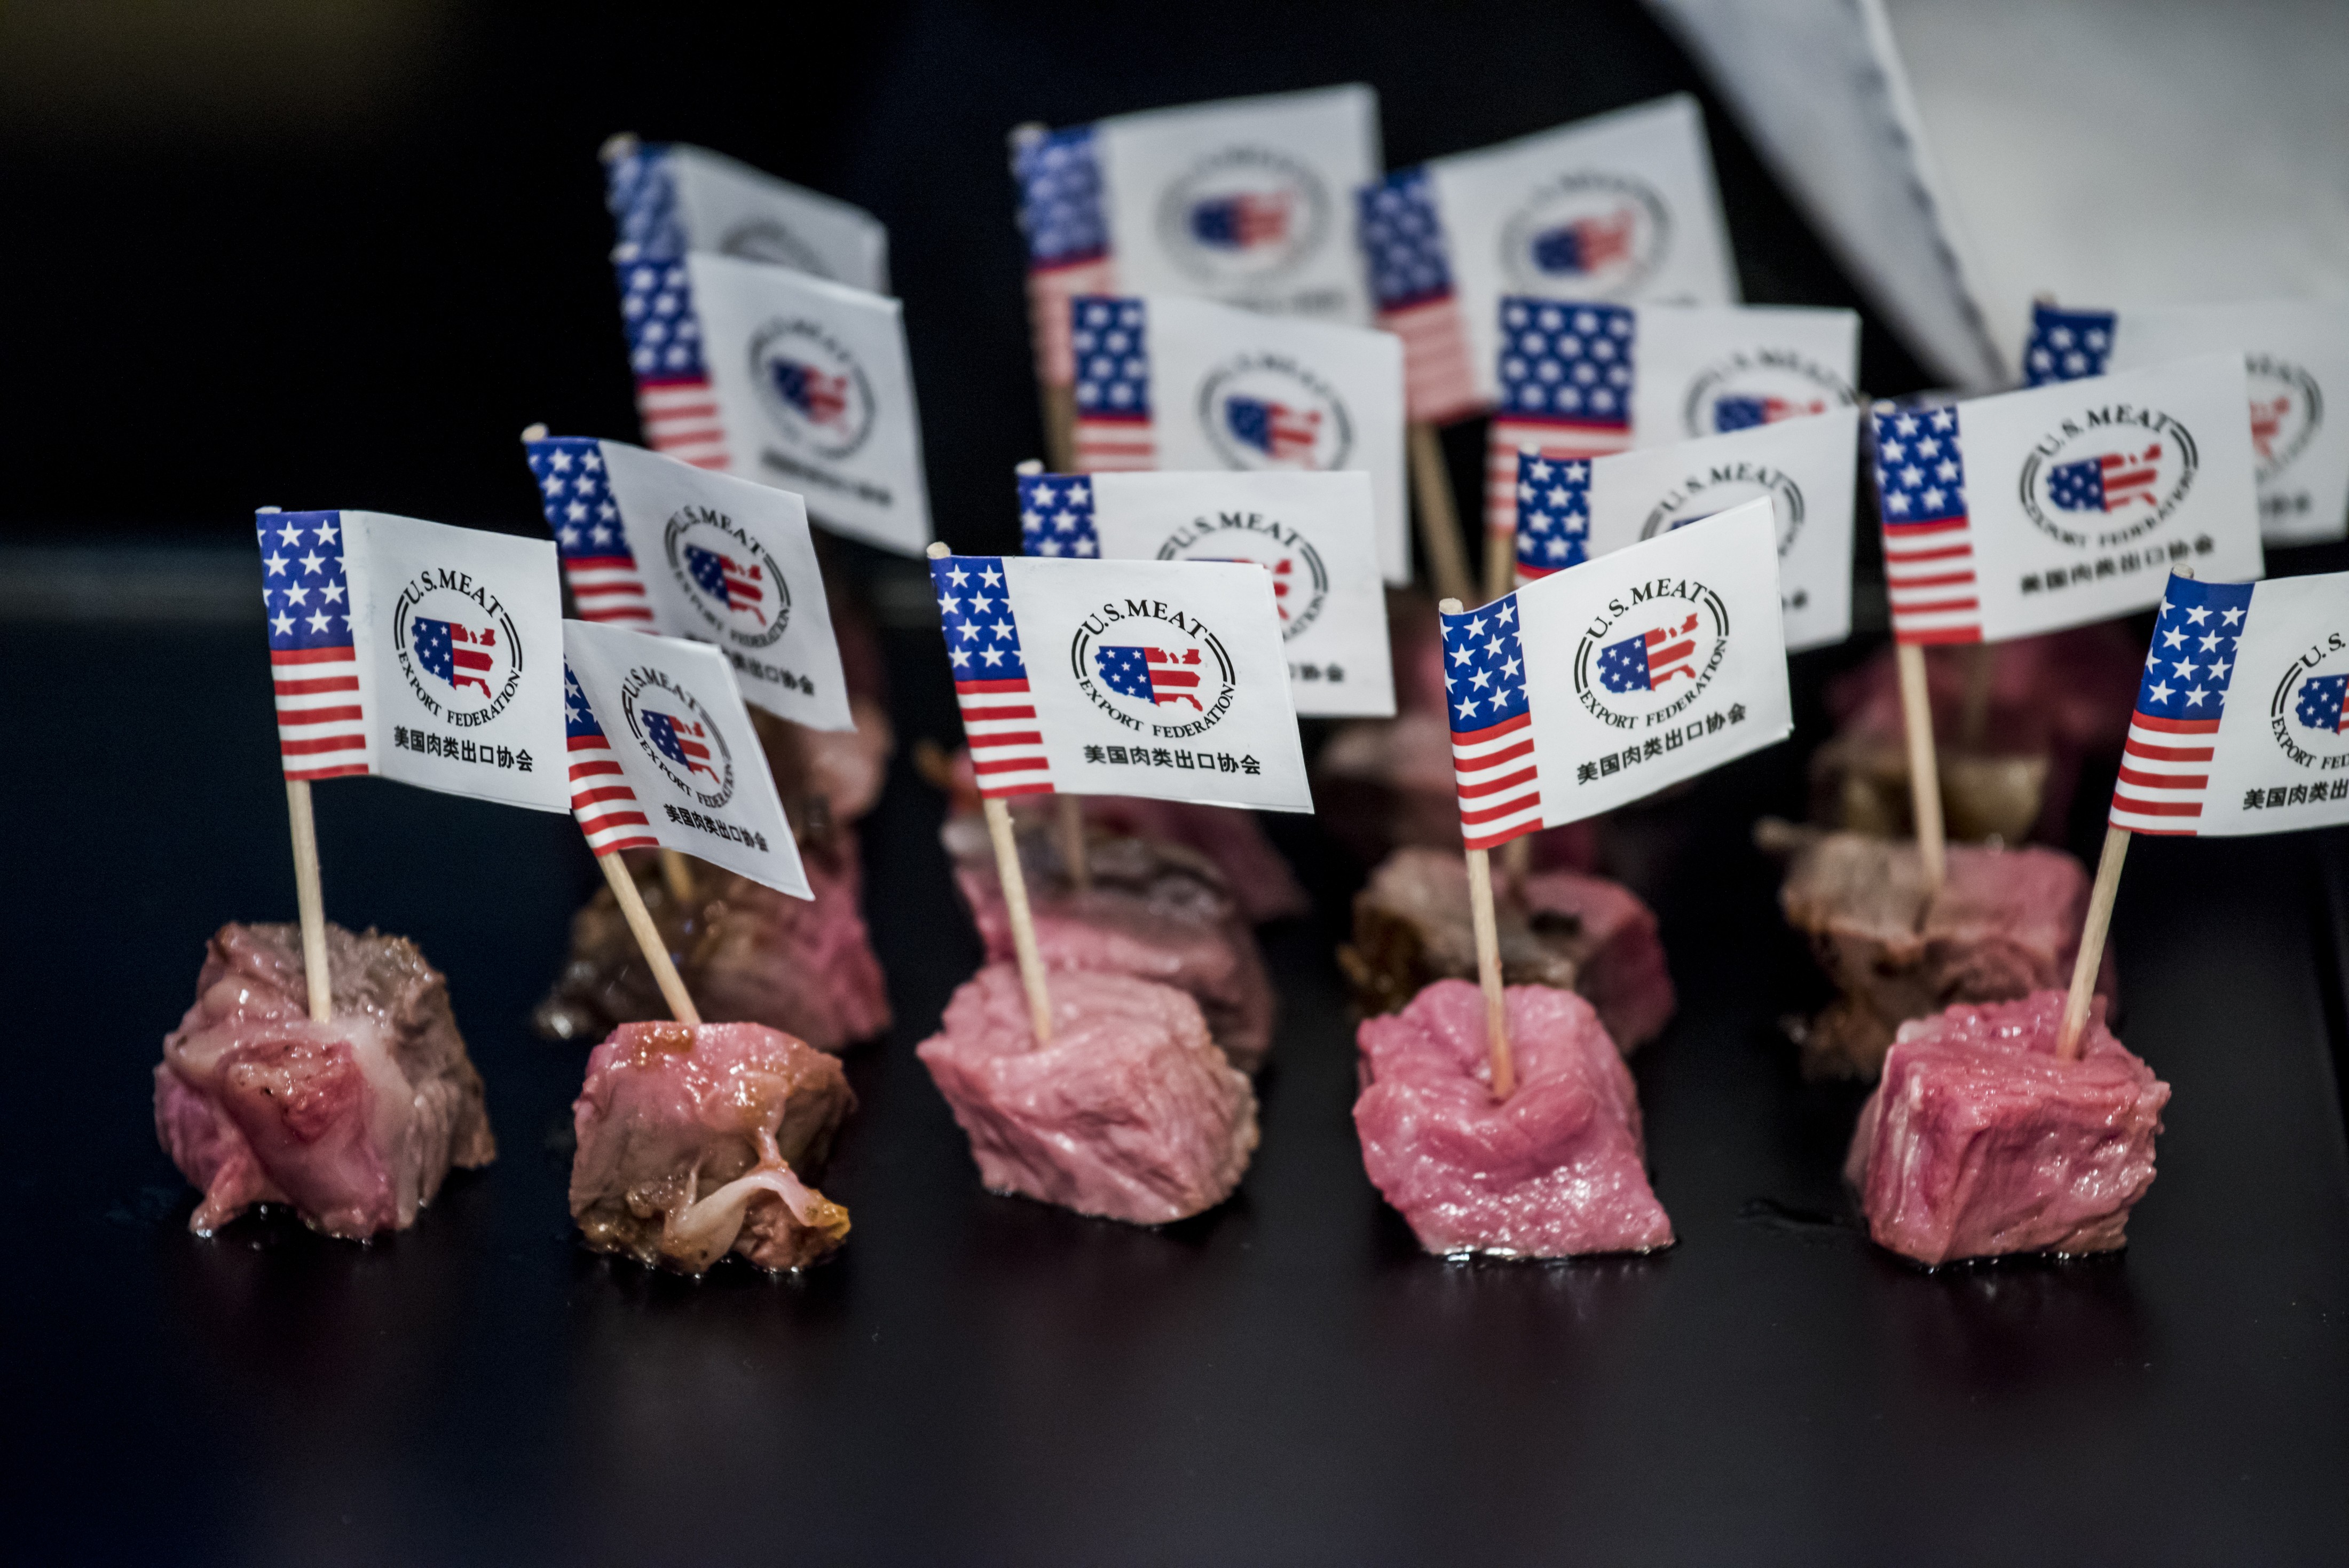 American beef could be one of the big winners as China increases its imports, according to analysts. Photo: AFP